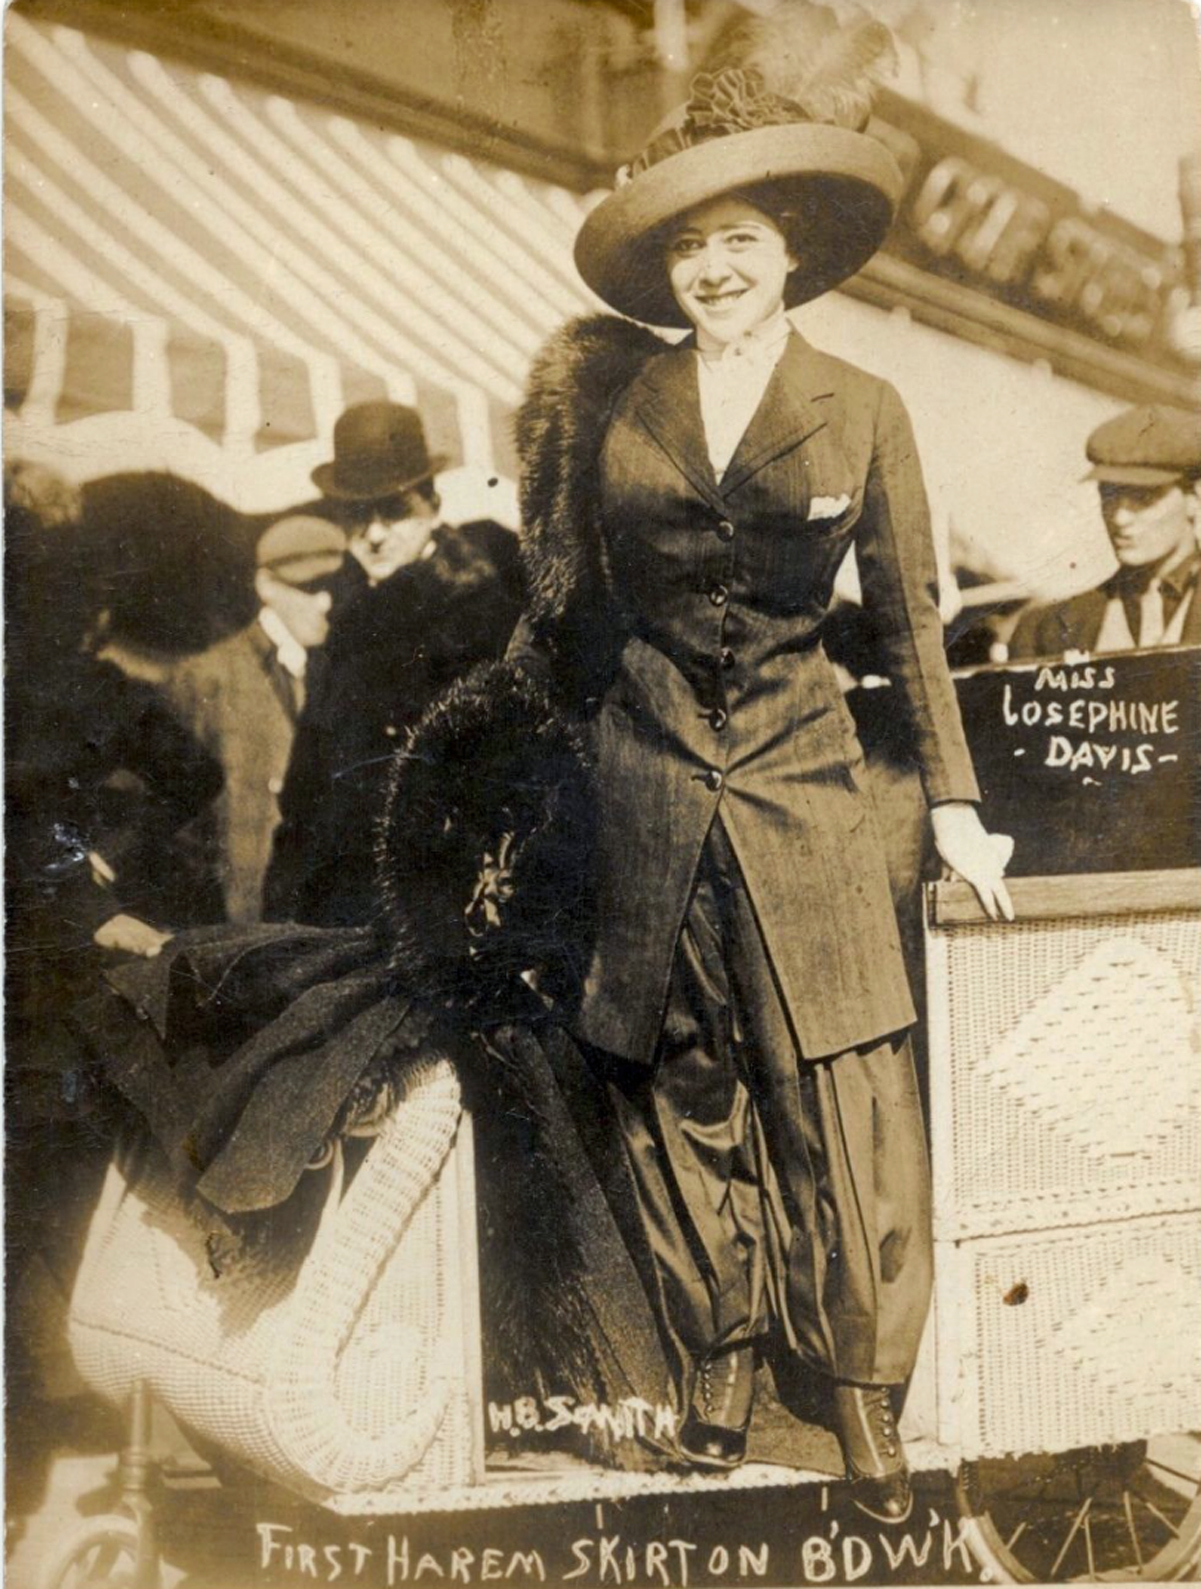 Atlantic City - Apparently the first Harem Skirt reported and photographed on the boardwalk - 1911